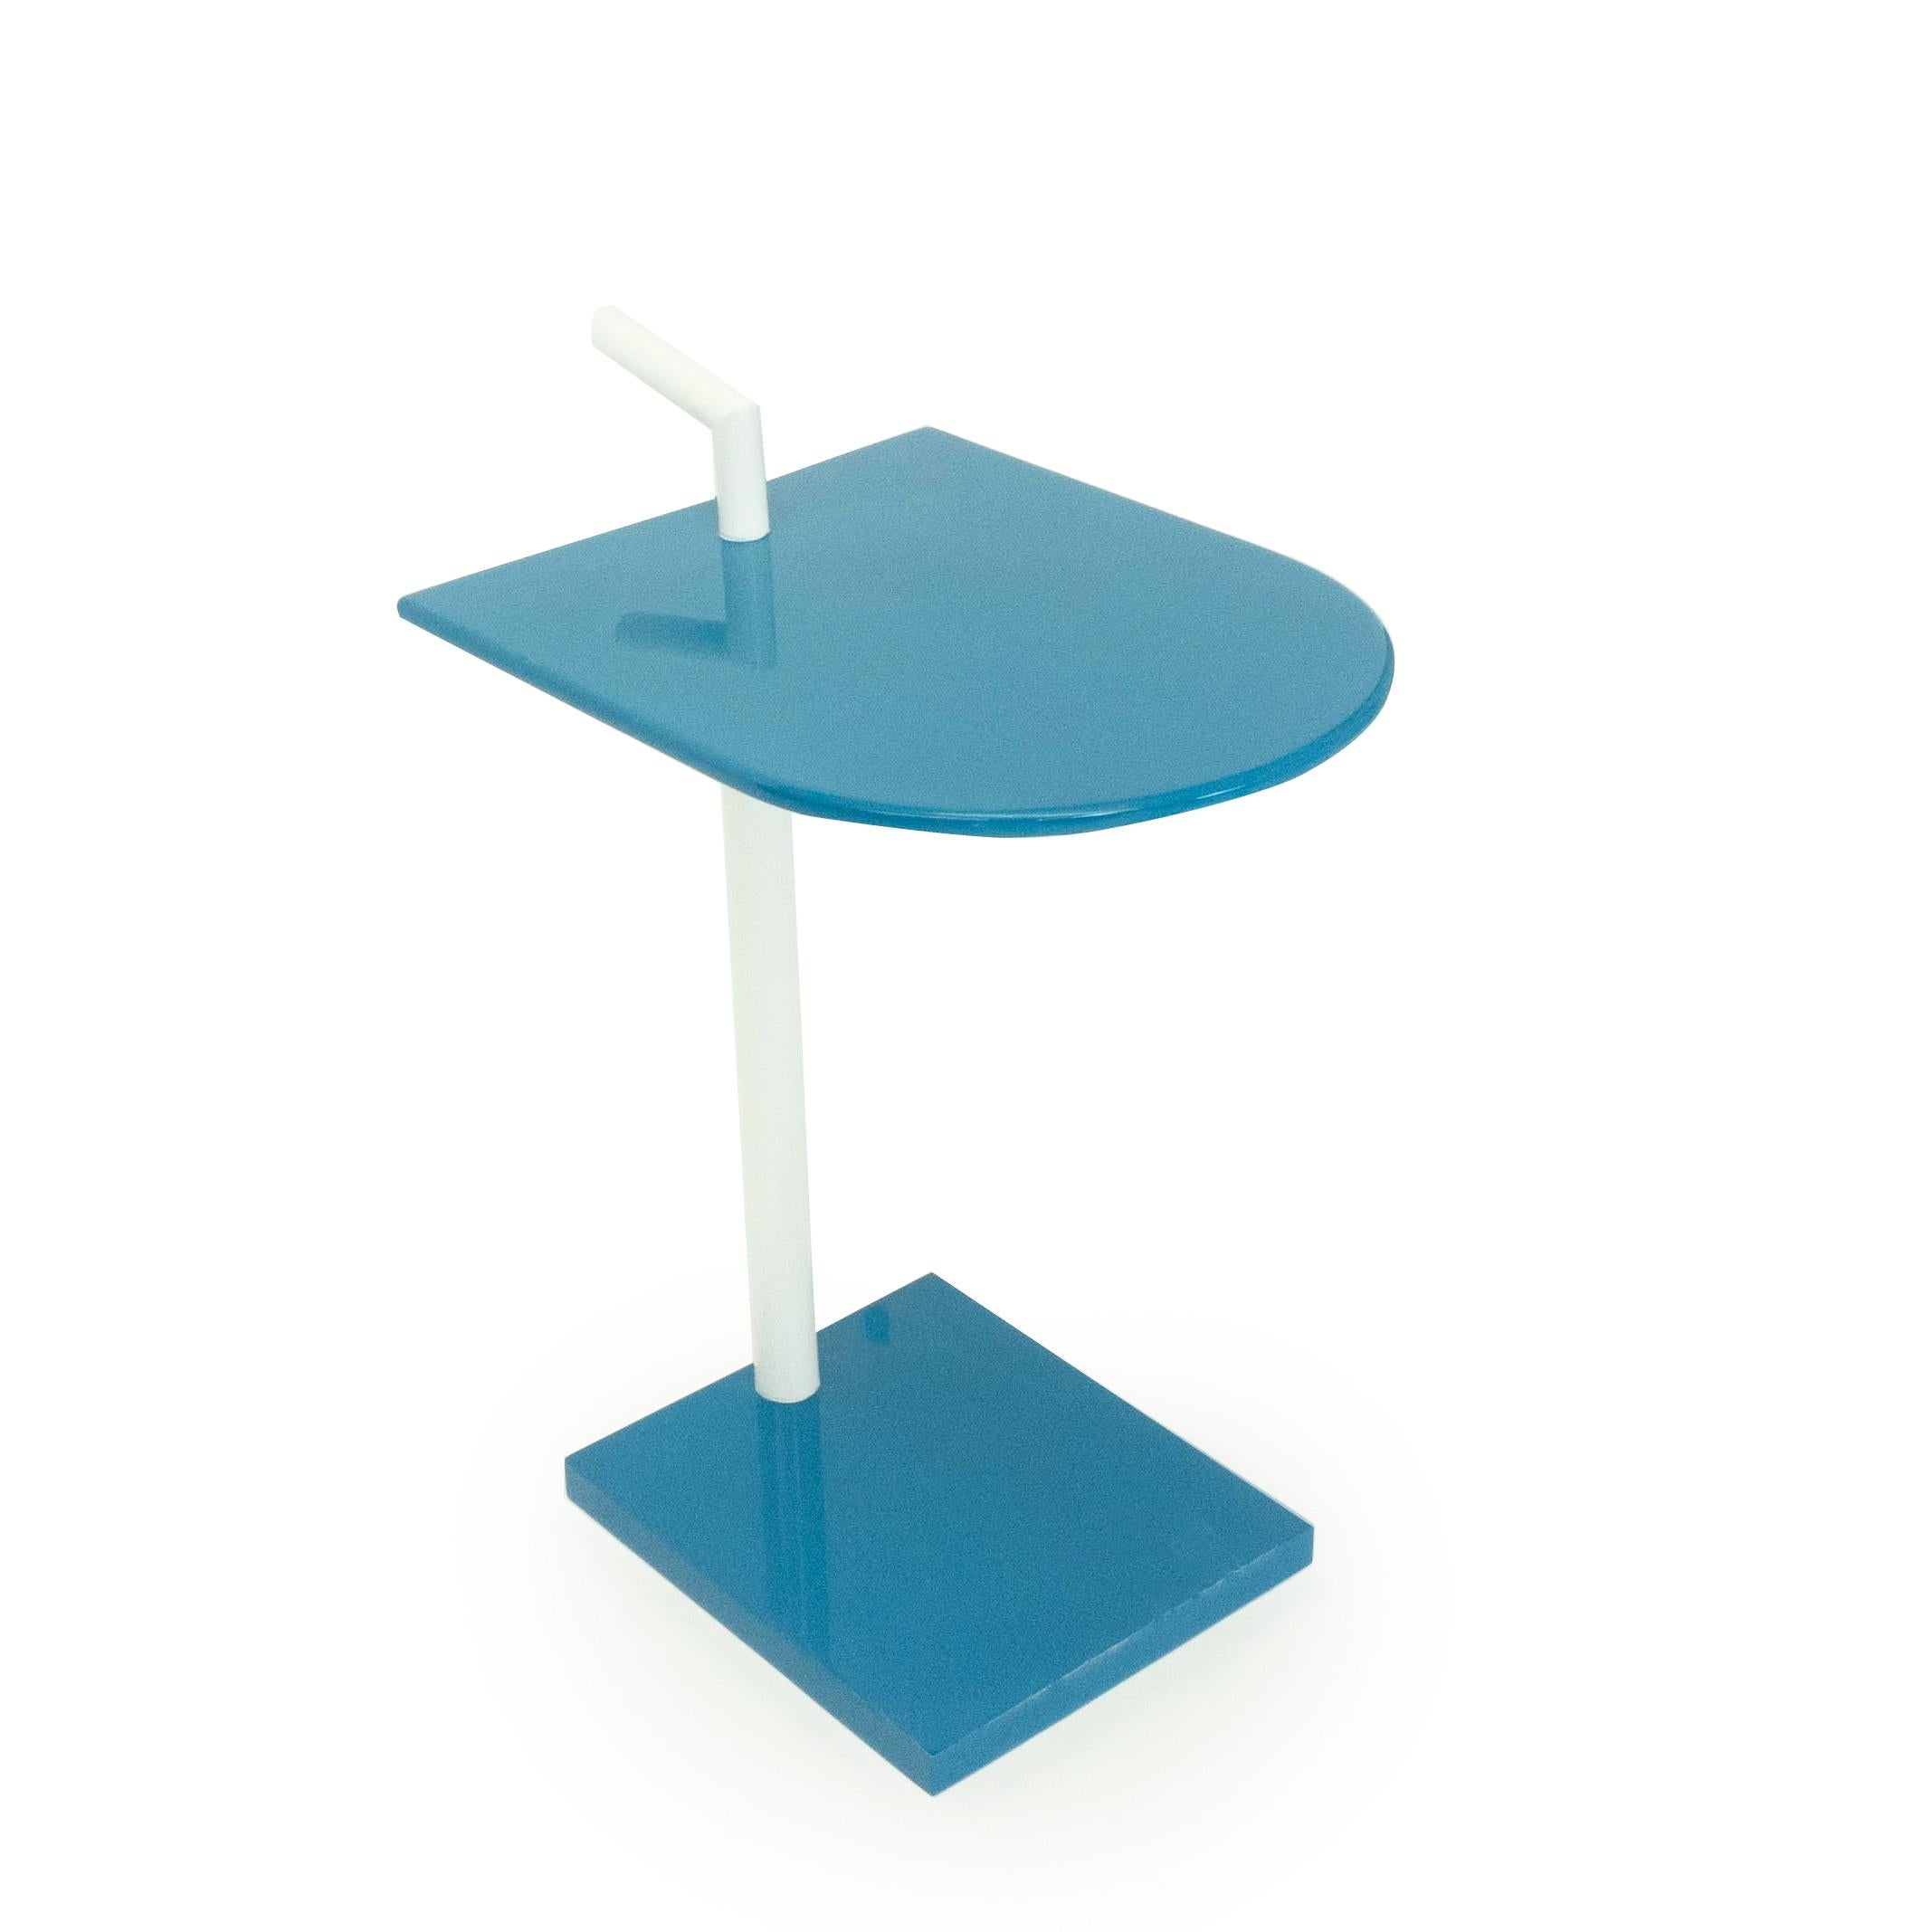 Ultra modern cigarette table designed and manufactured by us in Norwalk CT. Made of wood with a blue and white lacquer finish. Table functions as end table for tight spaces. This table can be lifted with the handle while securing objects on the